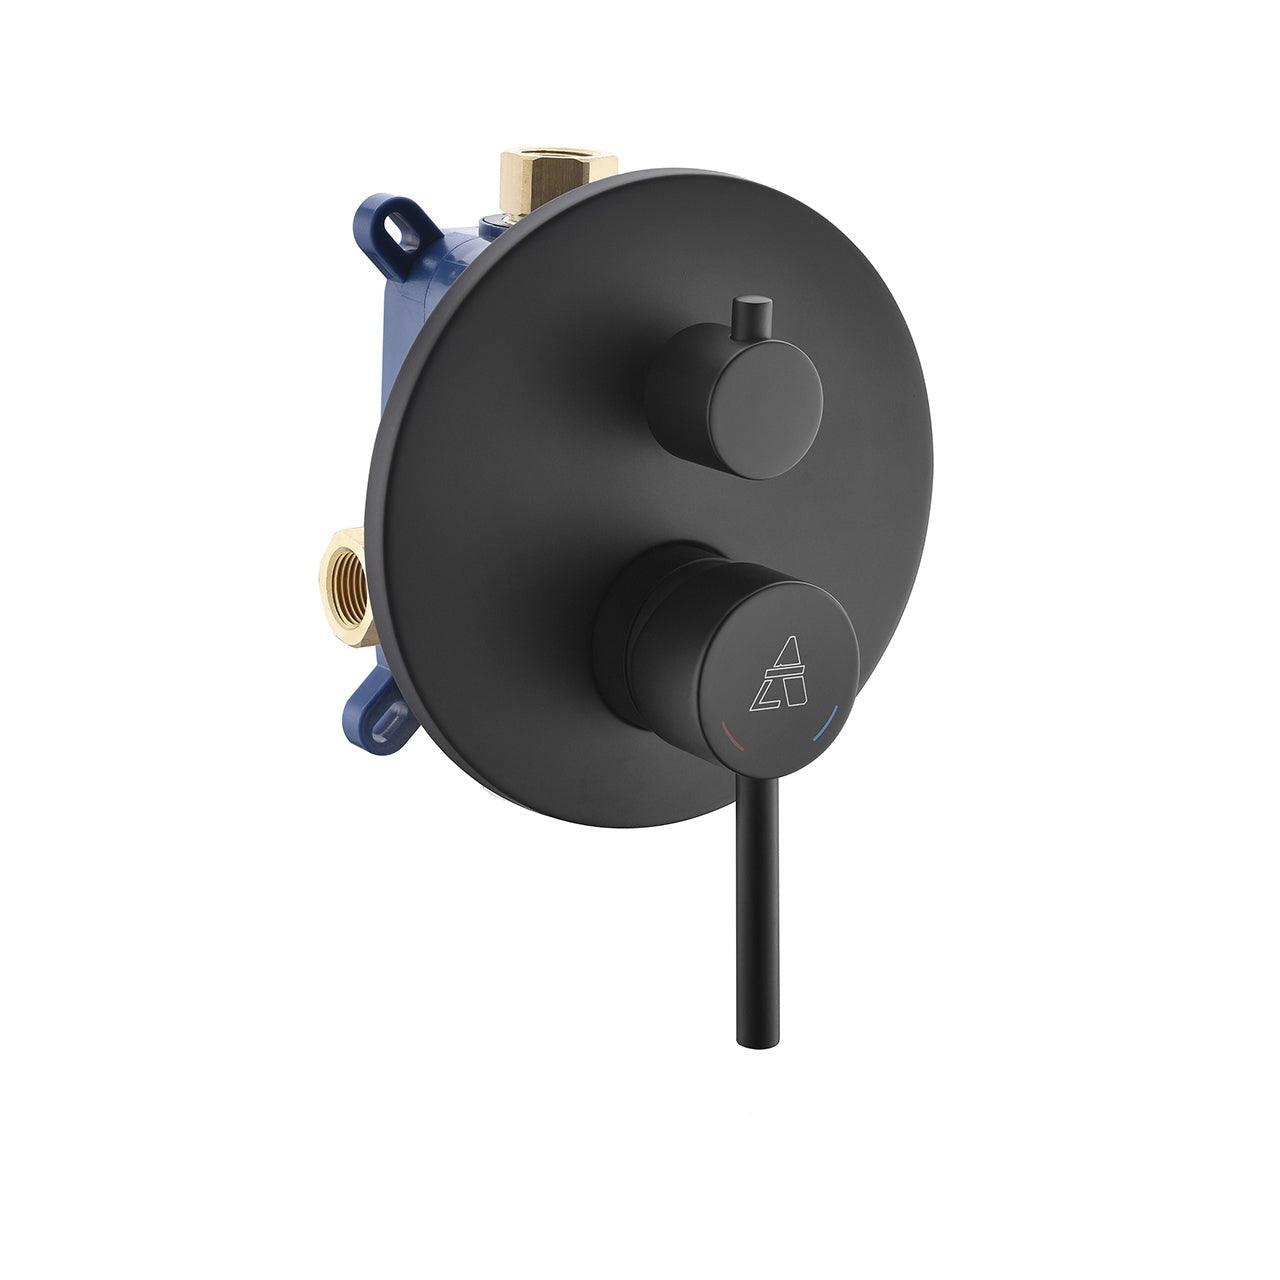 Aqua Rondo 2-Way Rough-In Shower Valve With Cover Plate, Handle and Diverter - Hbdepot